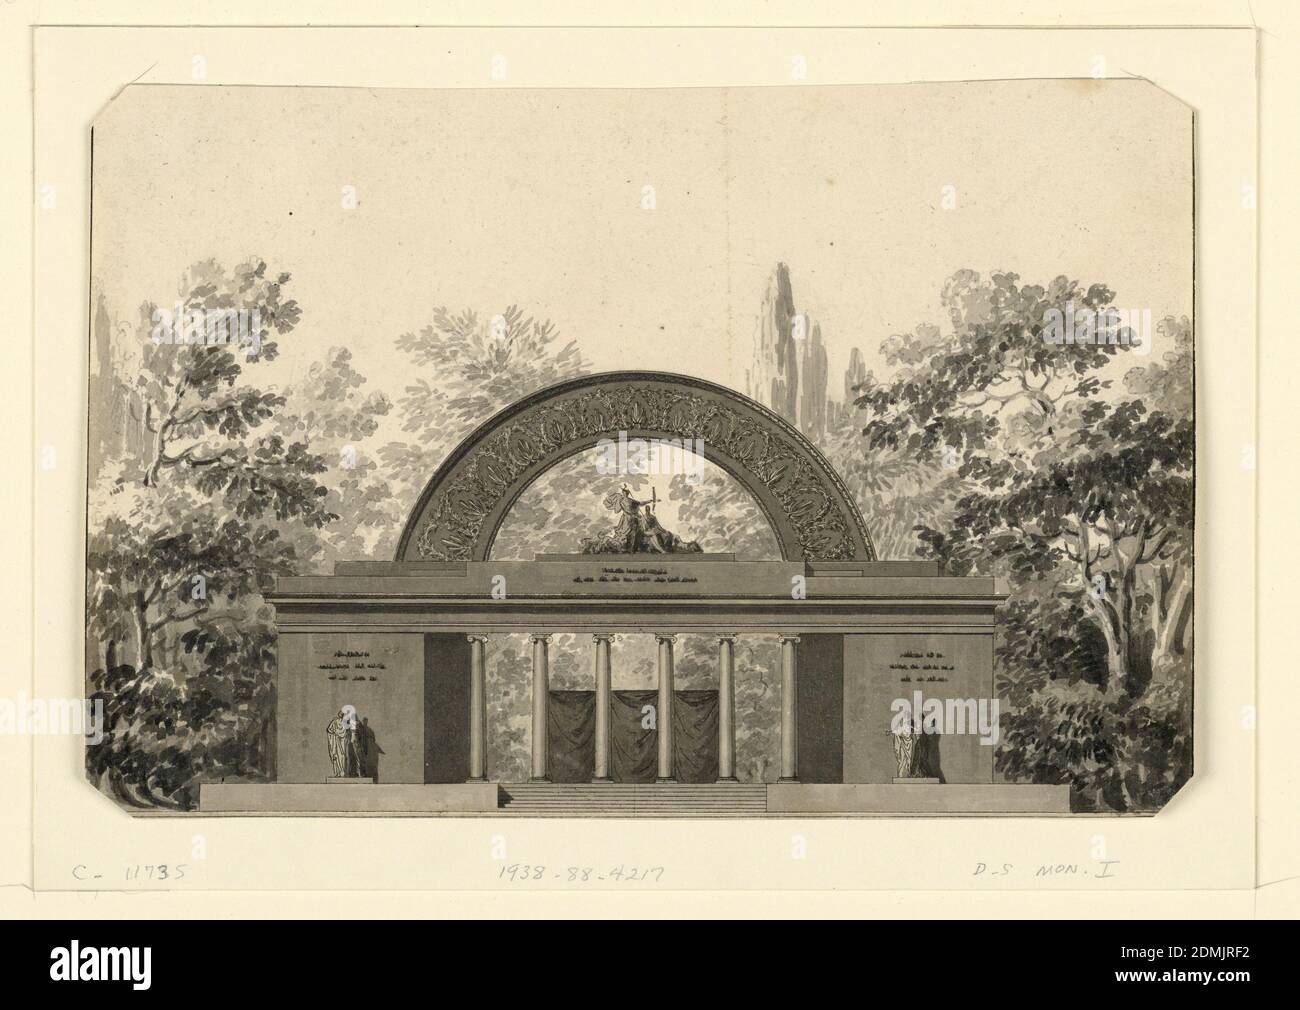 Mausoleum in a Park, Pen and black ink, brush and gray wash on wove paper, Elevation of a horizontal, one-story structure with six Ionic columns in the center. On either end of the building sculptured figures are positioned against solid walls and below wall inscriptions; another group of figures in positioned on the roof of the monument and at the center, above the colonnade. The group is contained within a large semicircular arch decorated with a floral pattern. There is an inscription on the wall below the central sculptural grouping. There are trees located next to and behind the monument Stock Photo